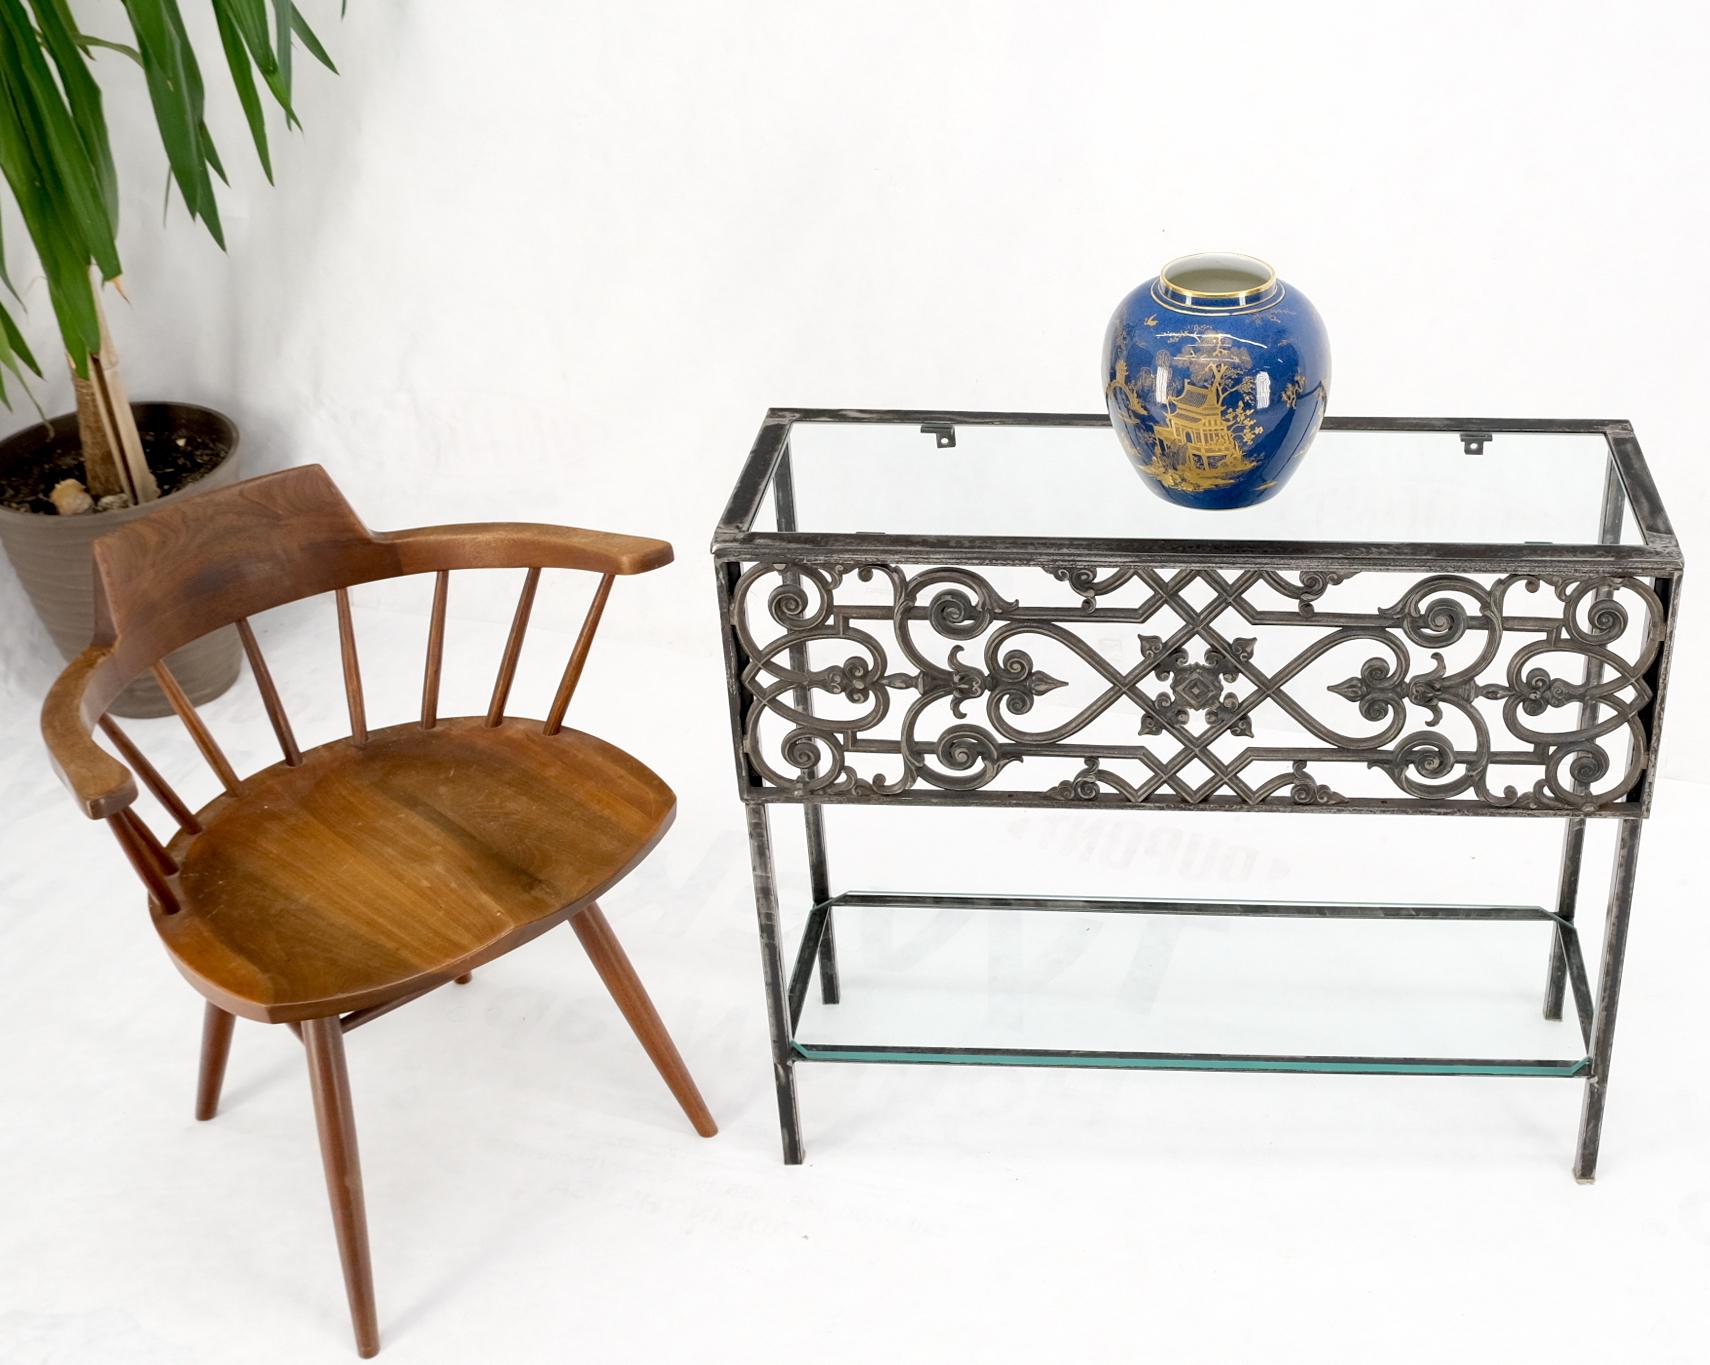 Polished Cast Iron Ornament 2 Tier Glass Top Lower Shelf Console Sofa Table For Sale 7